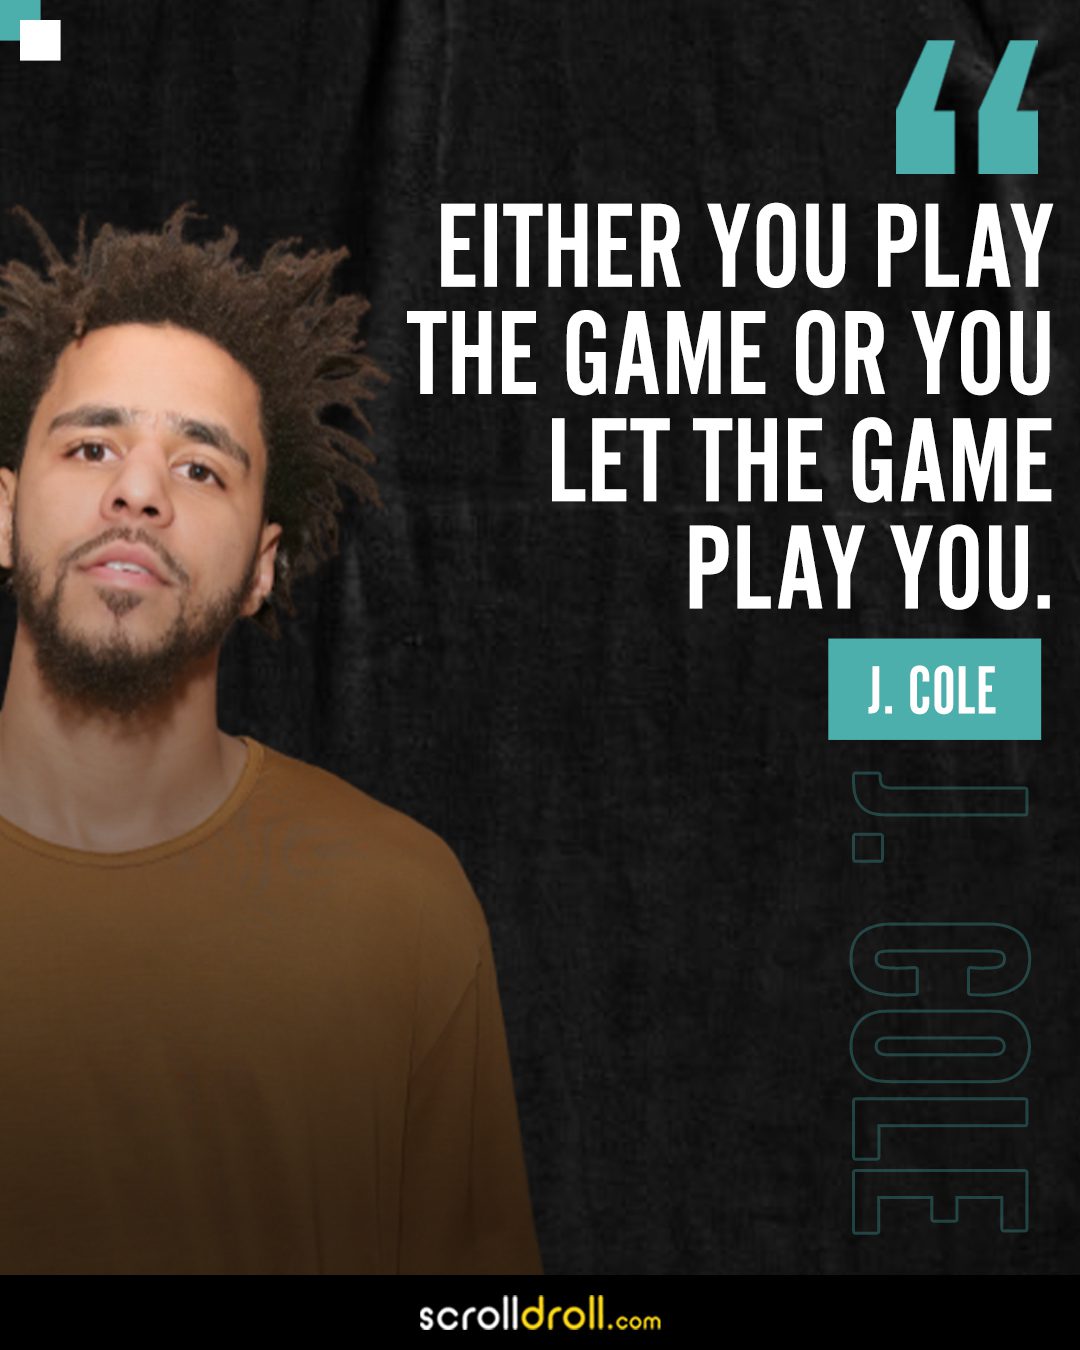 J. Cole quote: Either you play the game or let the game play